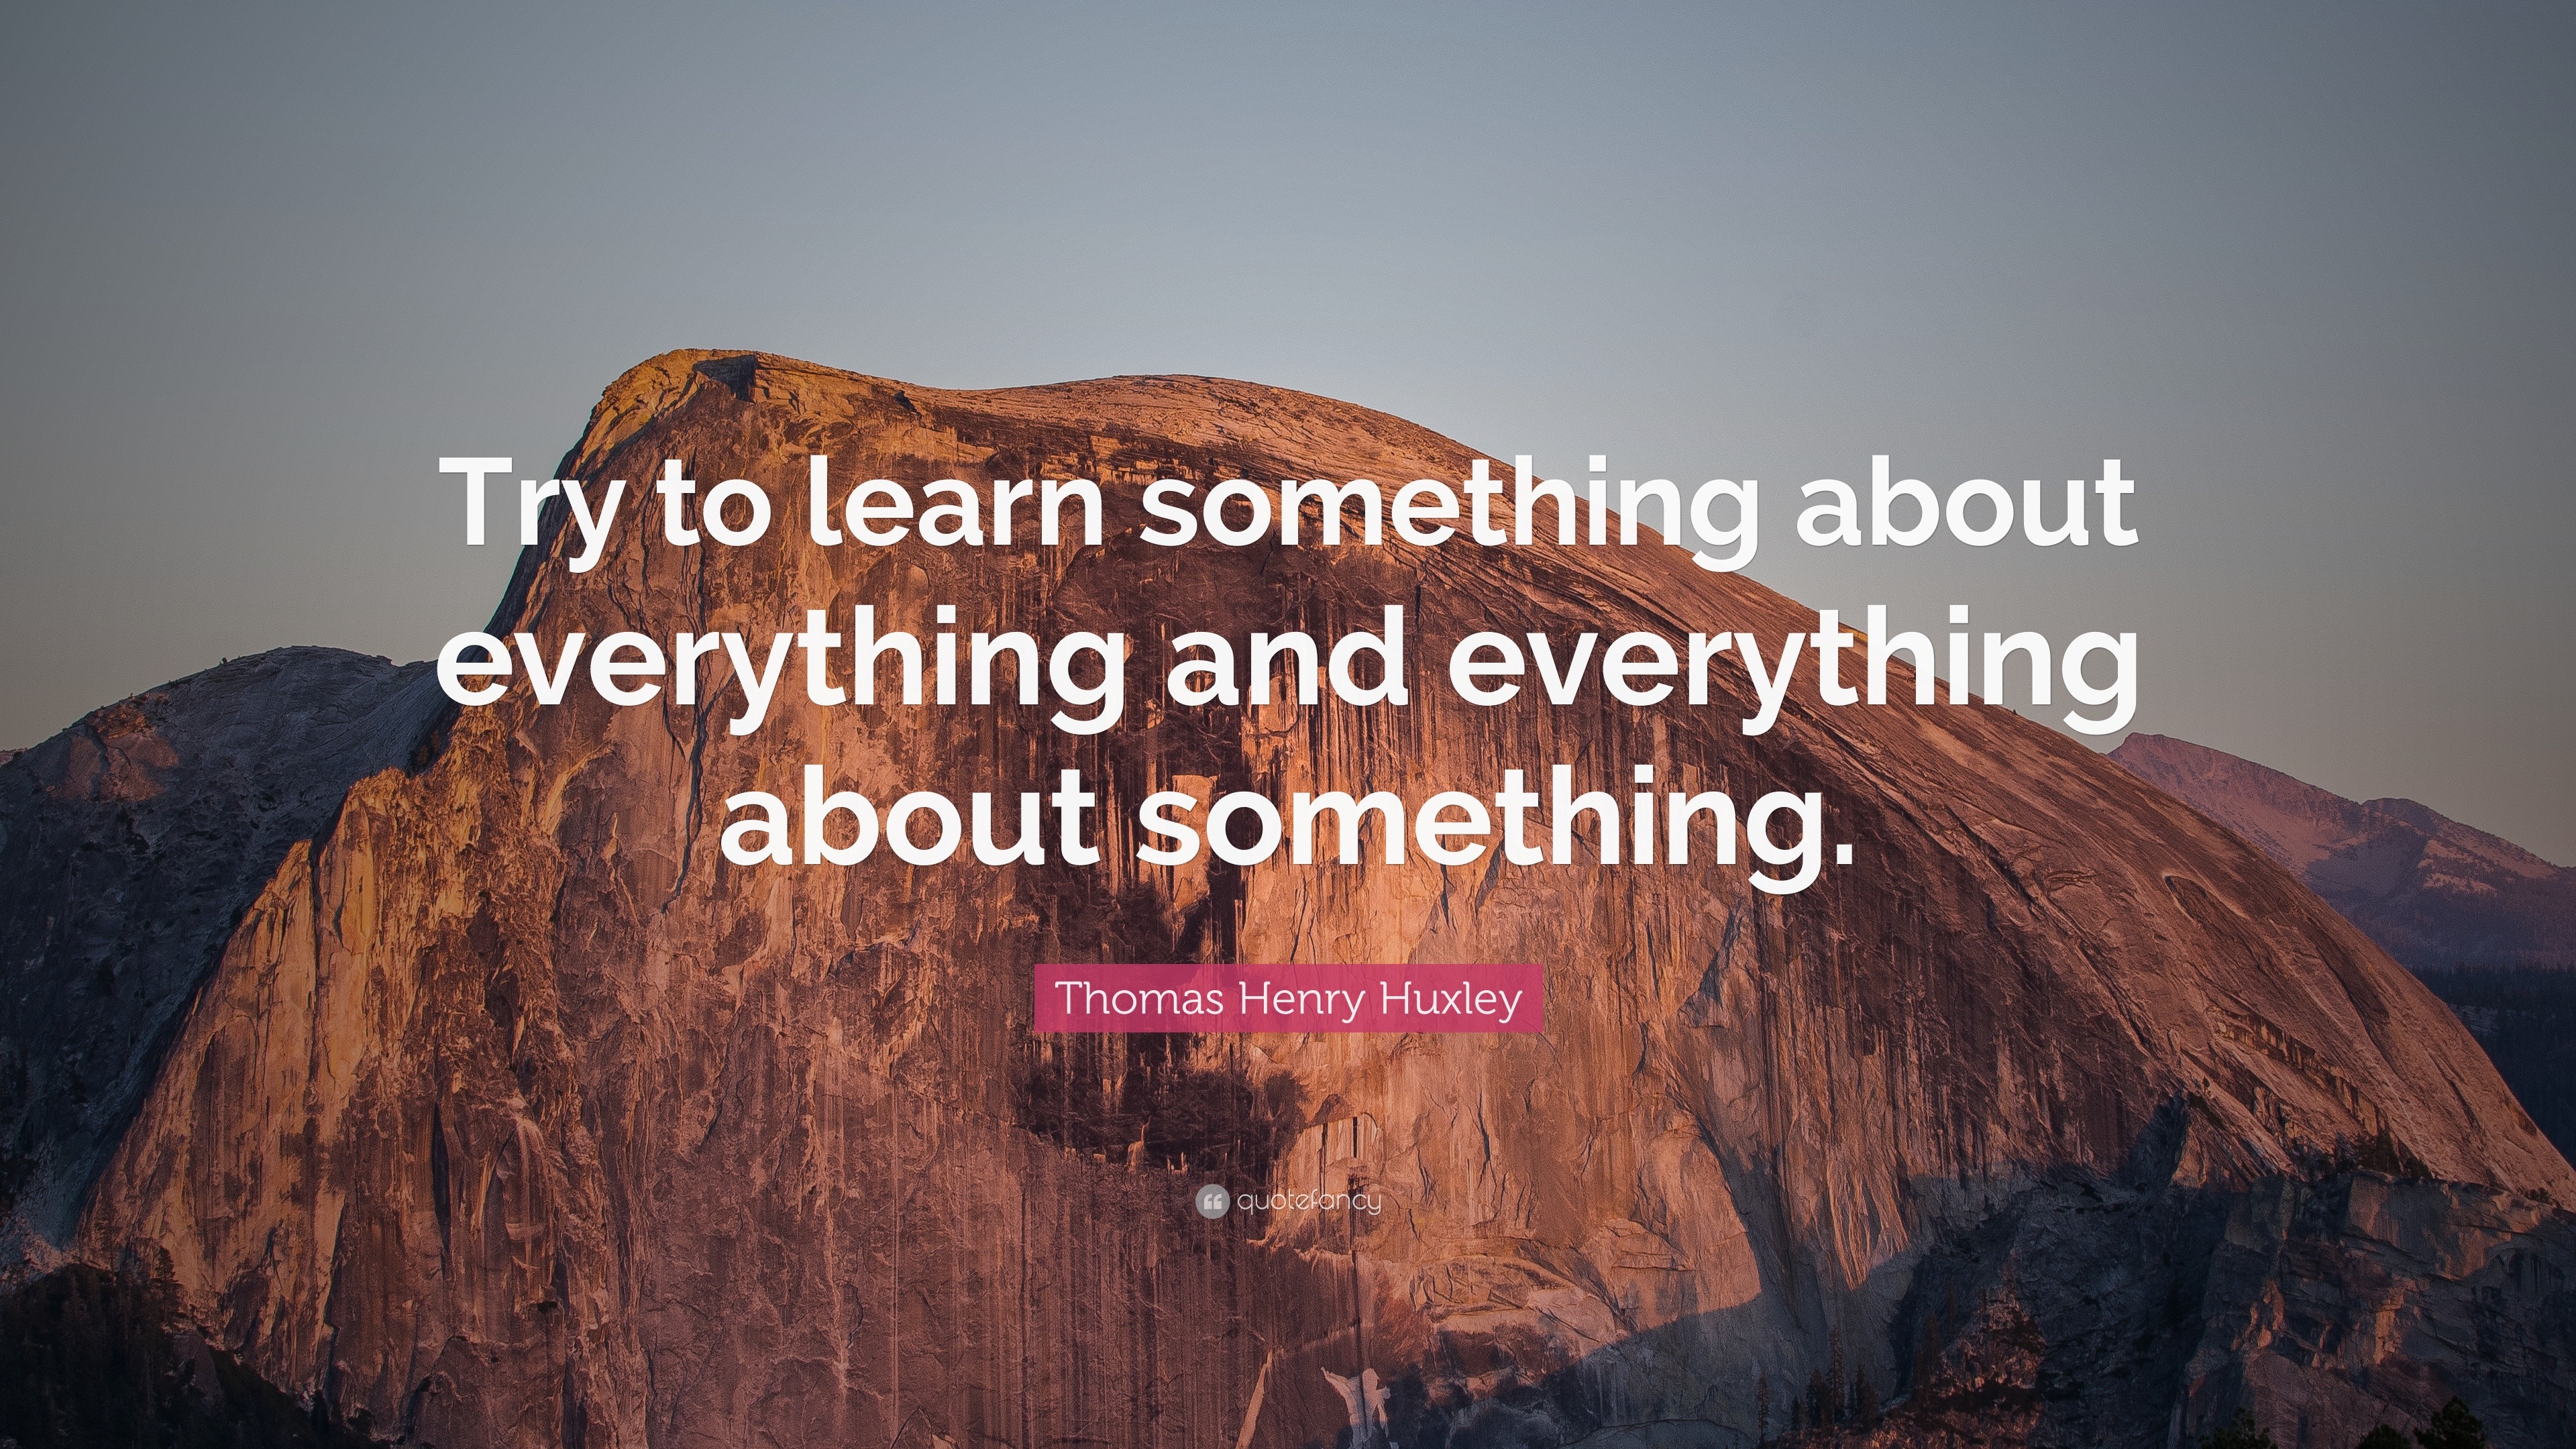 Thomas Henry Huxley Quote “try To Learn Something About Everything And